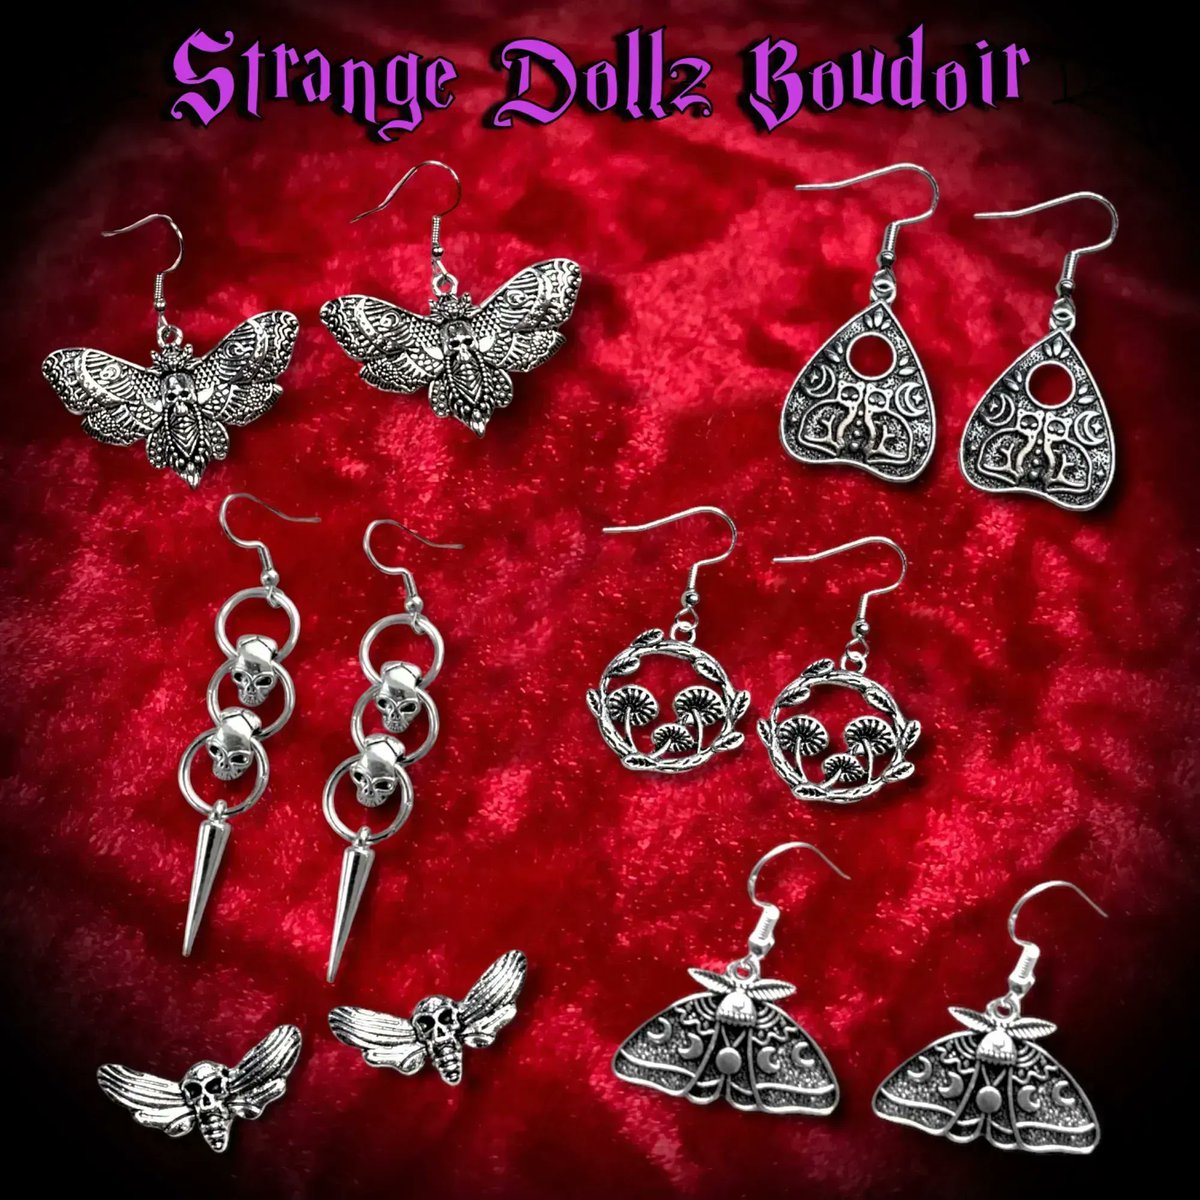 🦇 Spook up your life ! These beautiful earrings are available in our shop strange-dollz-boudoir.myshopify.com + You can also safely add them to your #Thronewishlist as we are a #ThronePartnerStore 👑🎁 #twitch #twitchtv #livestreamer #vtuber #ukstreamer #gothgf #gothic #LiveStream